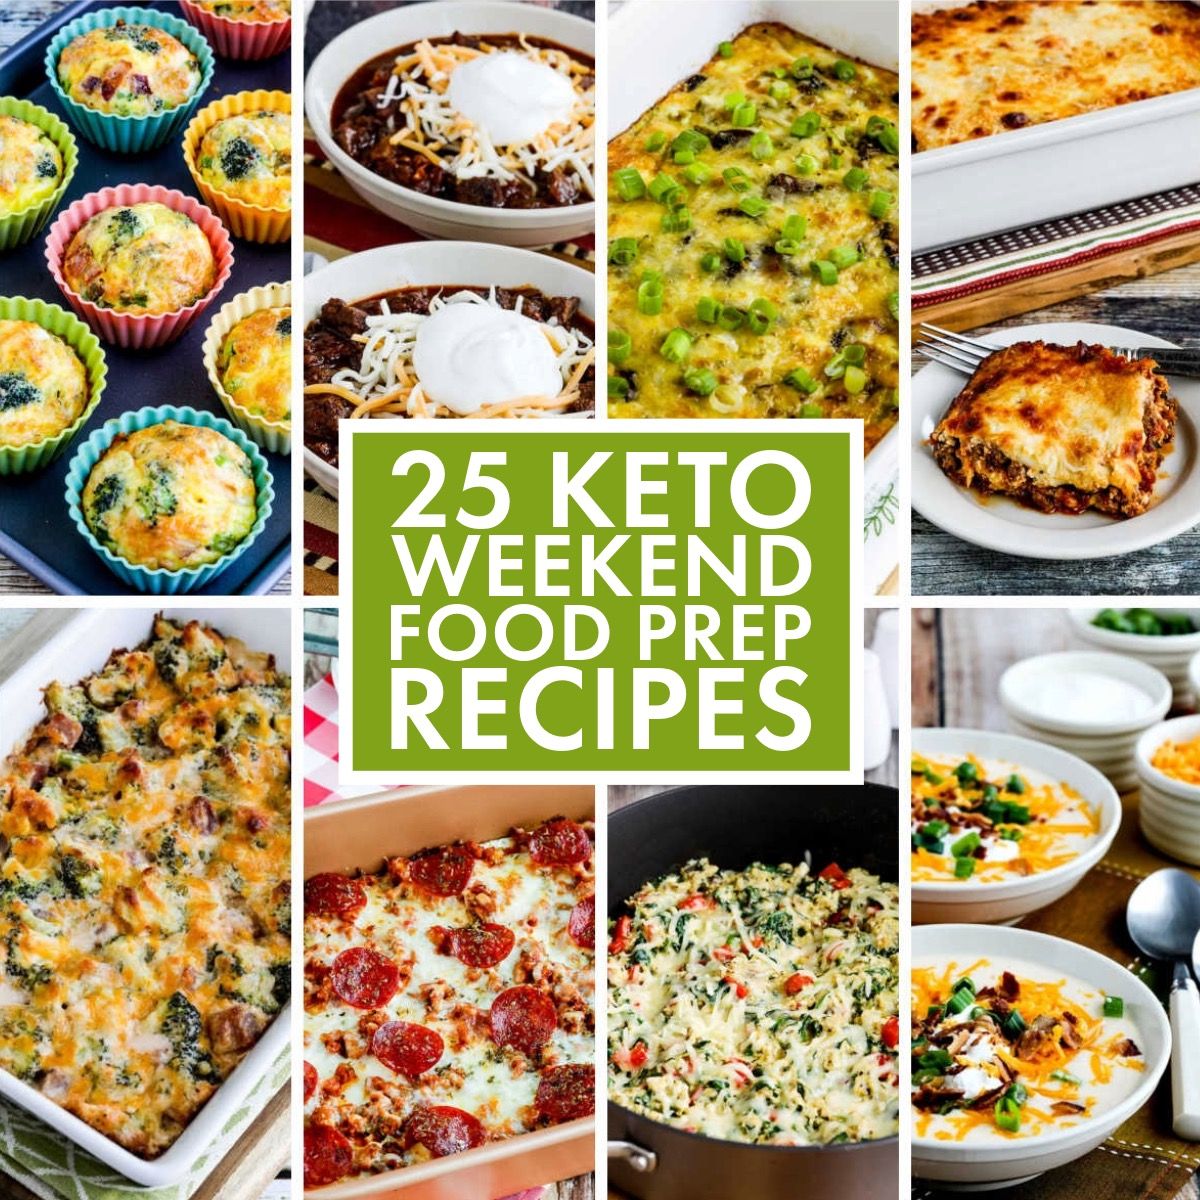 Collage photo for 25 Keto Weekend Food Prep Recipes showing featured recipes!